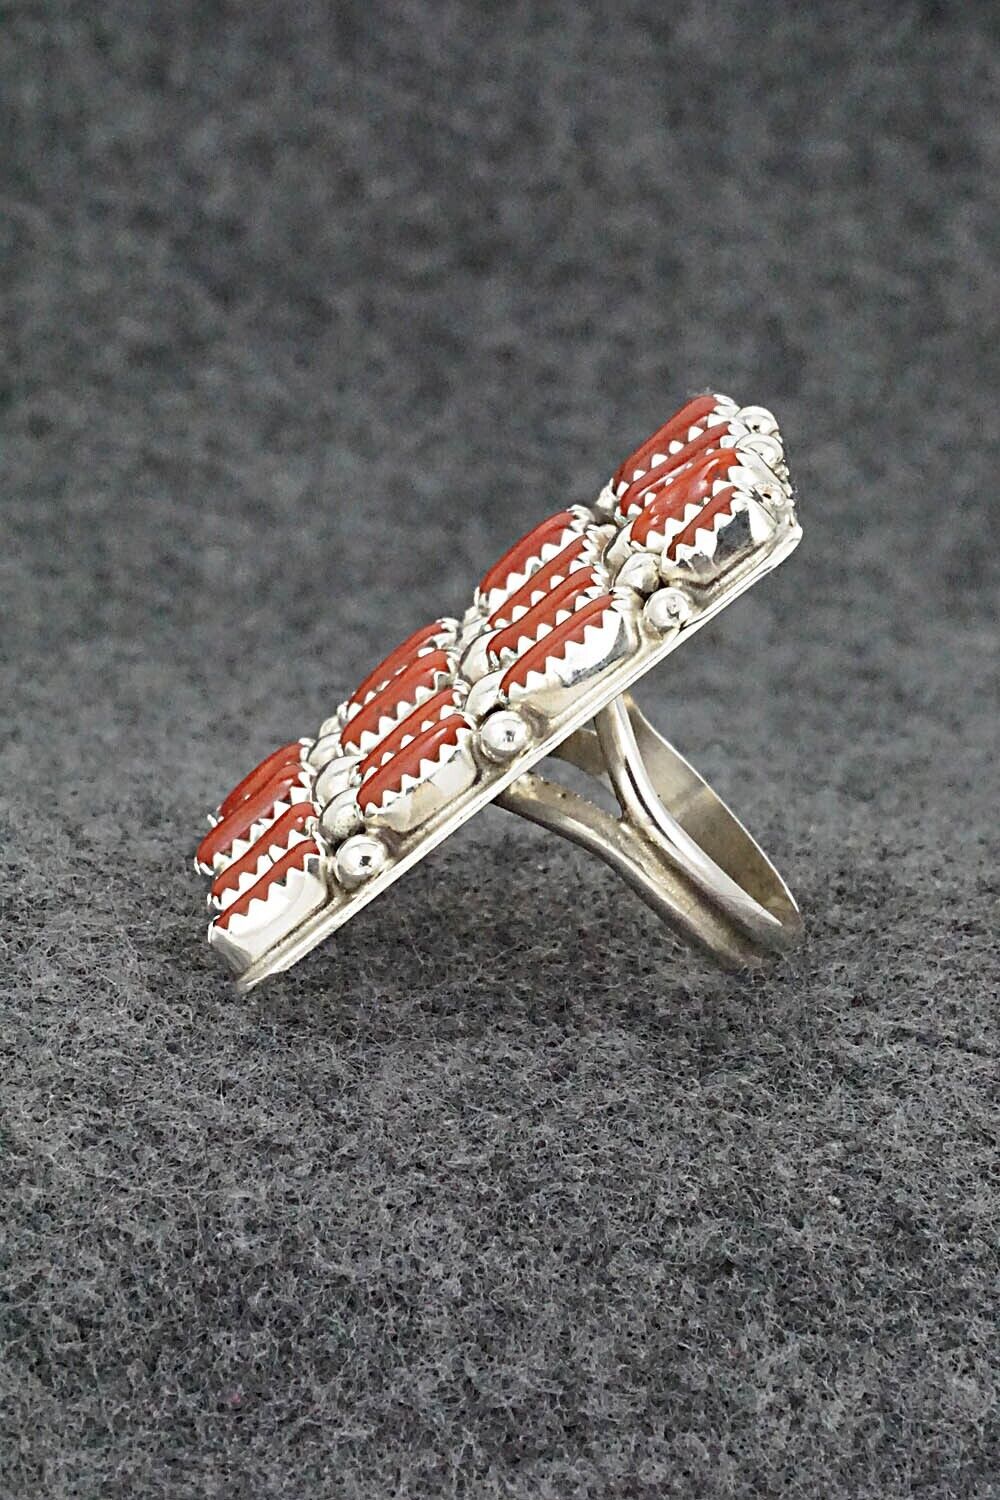 Coral and Sterling Silver Ring - Darlene Begay - Size 8.5